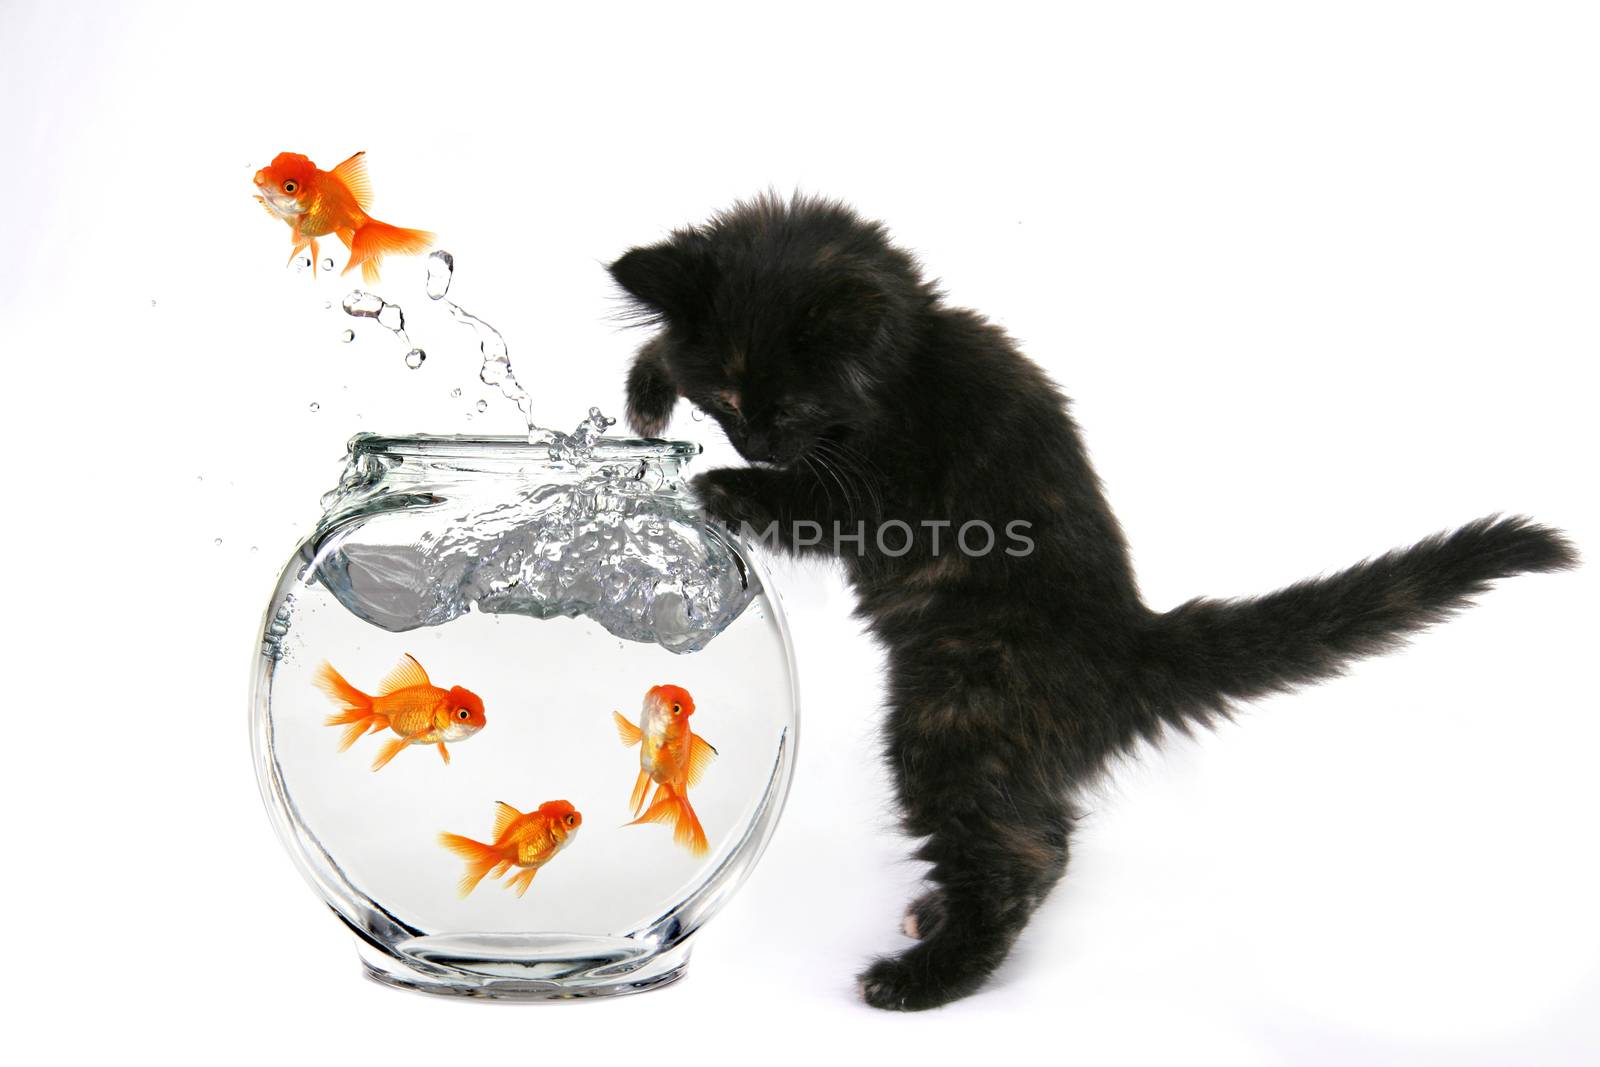 Kitten Catching Goldfish Jumping Out of a Fish Bowl by tobkatrina